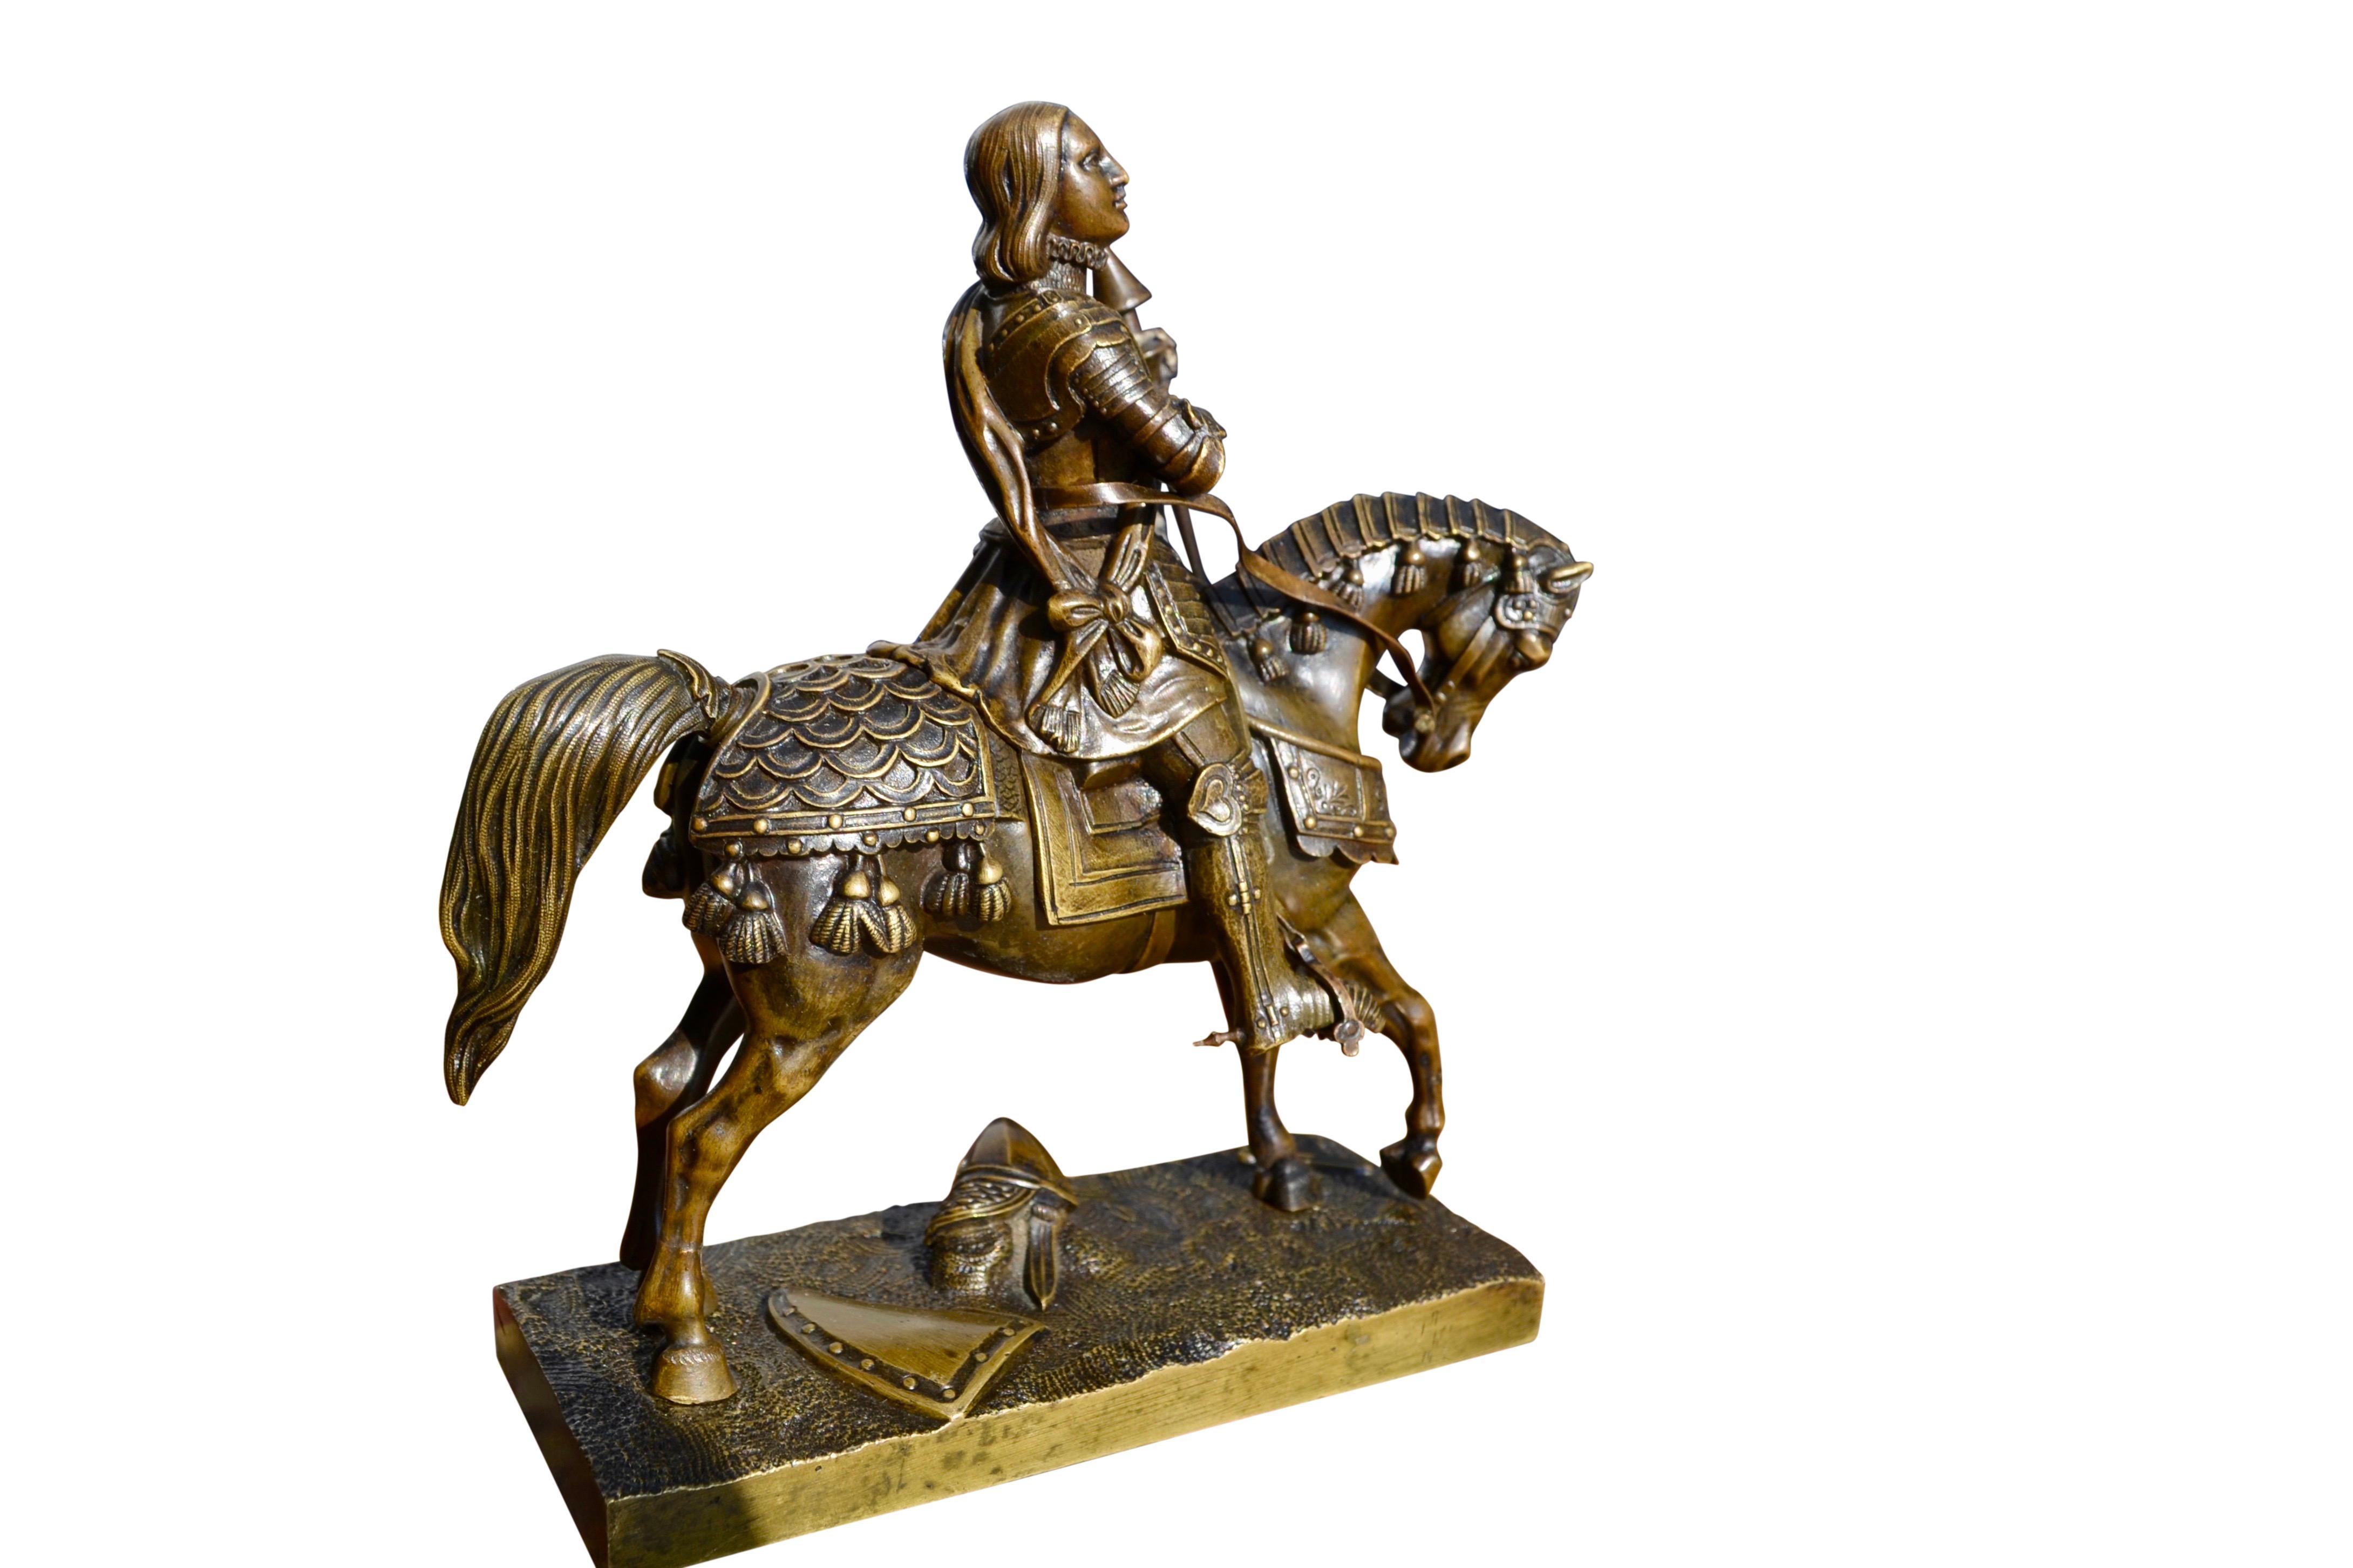 A 19 Century Bronze Statue of St Joan of Arc in full body armour on horseback In Good Condition For Sale In Vancouver, British Columbia